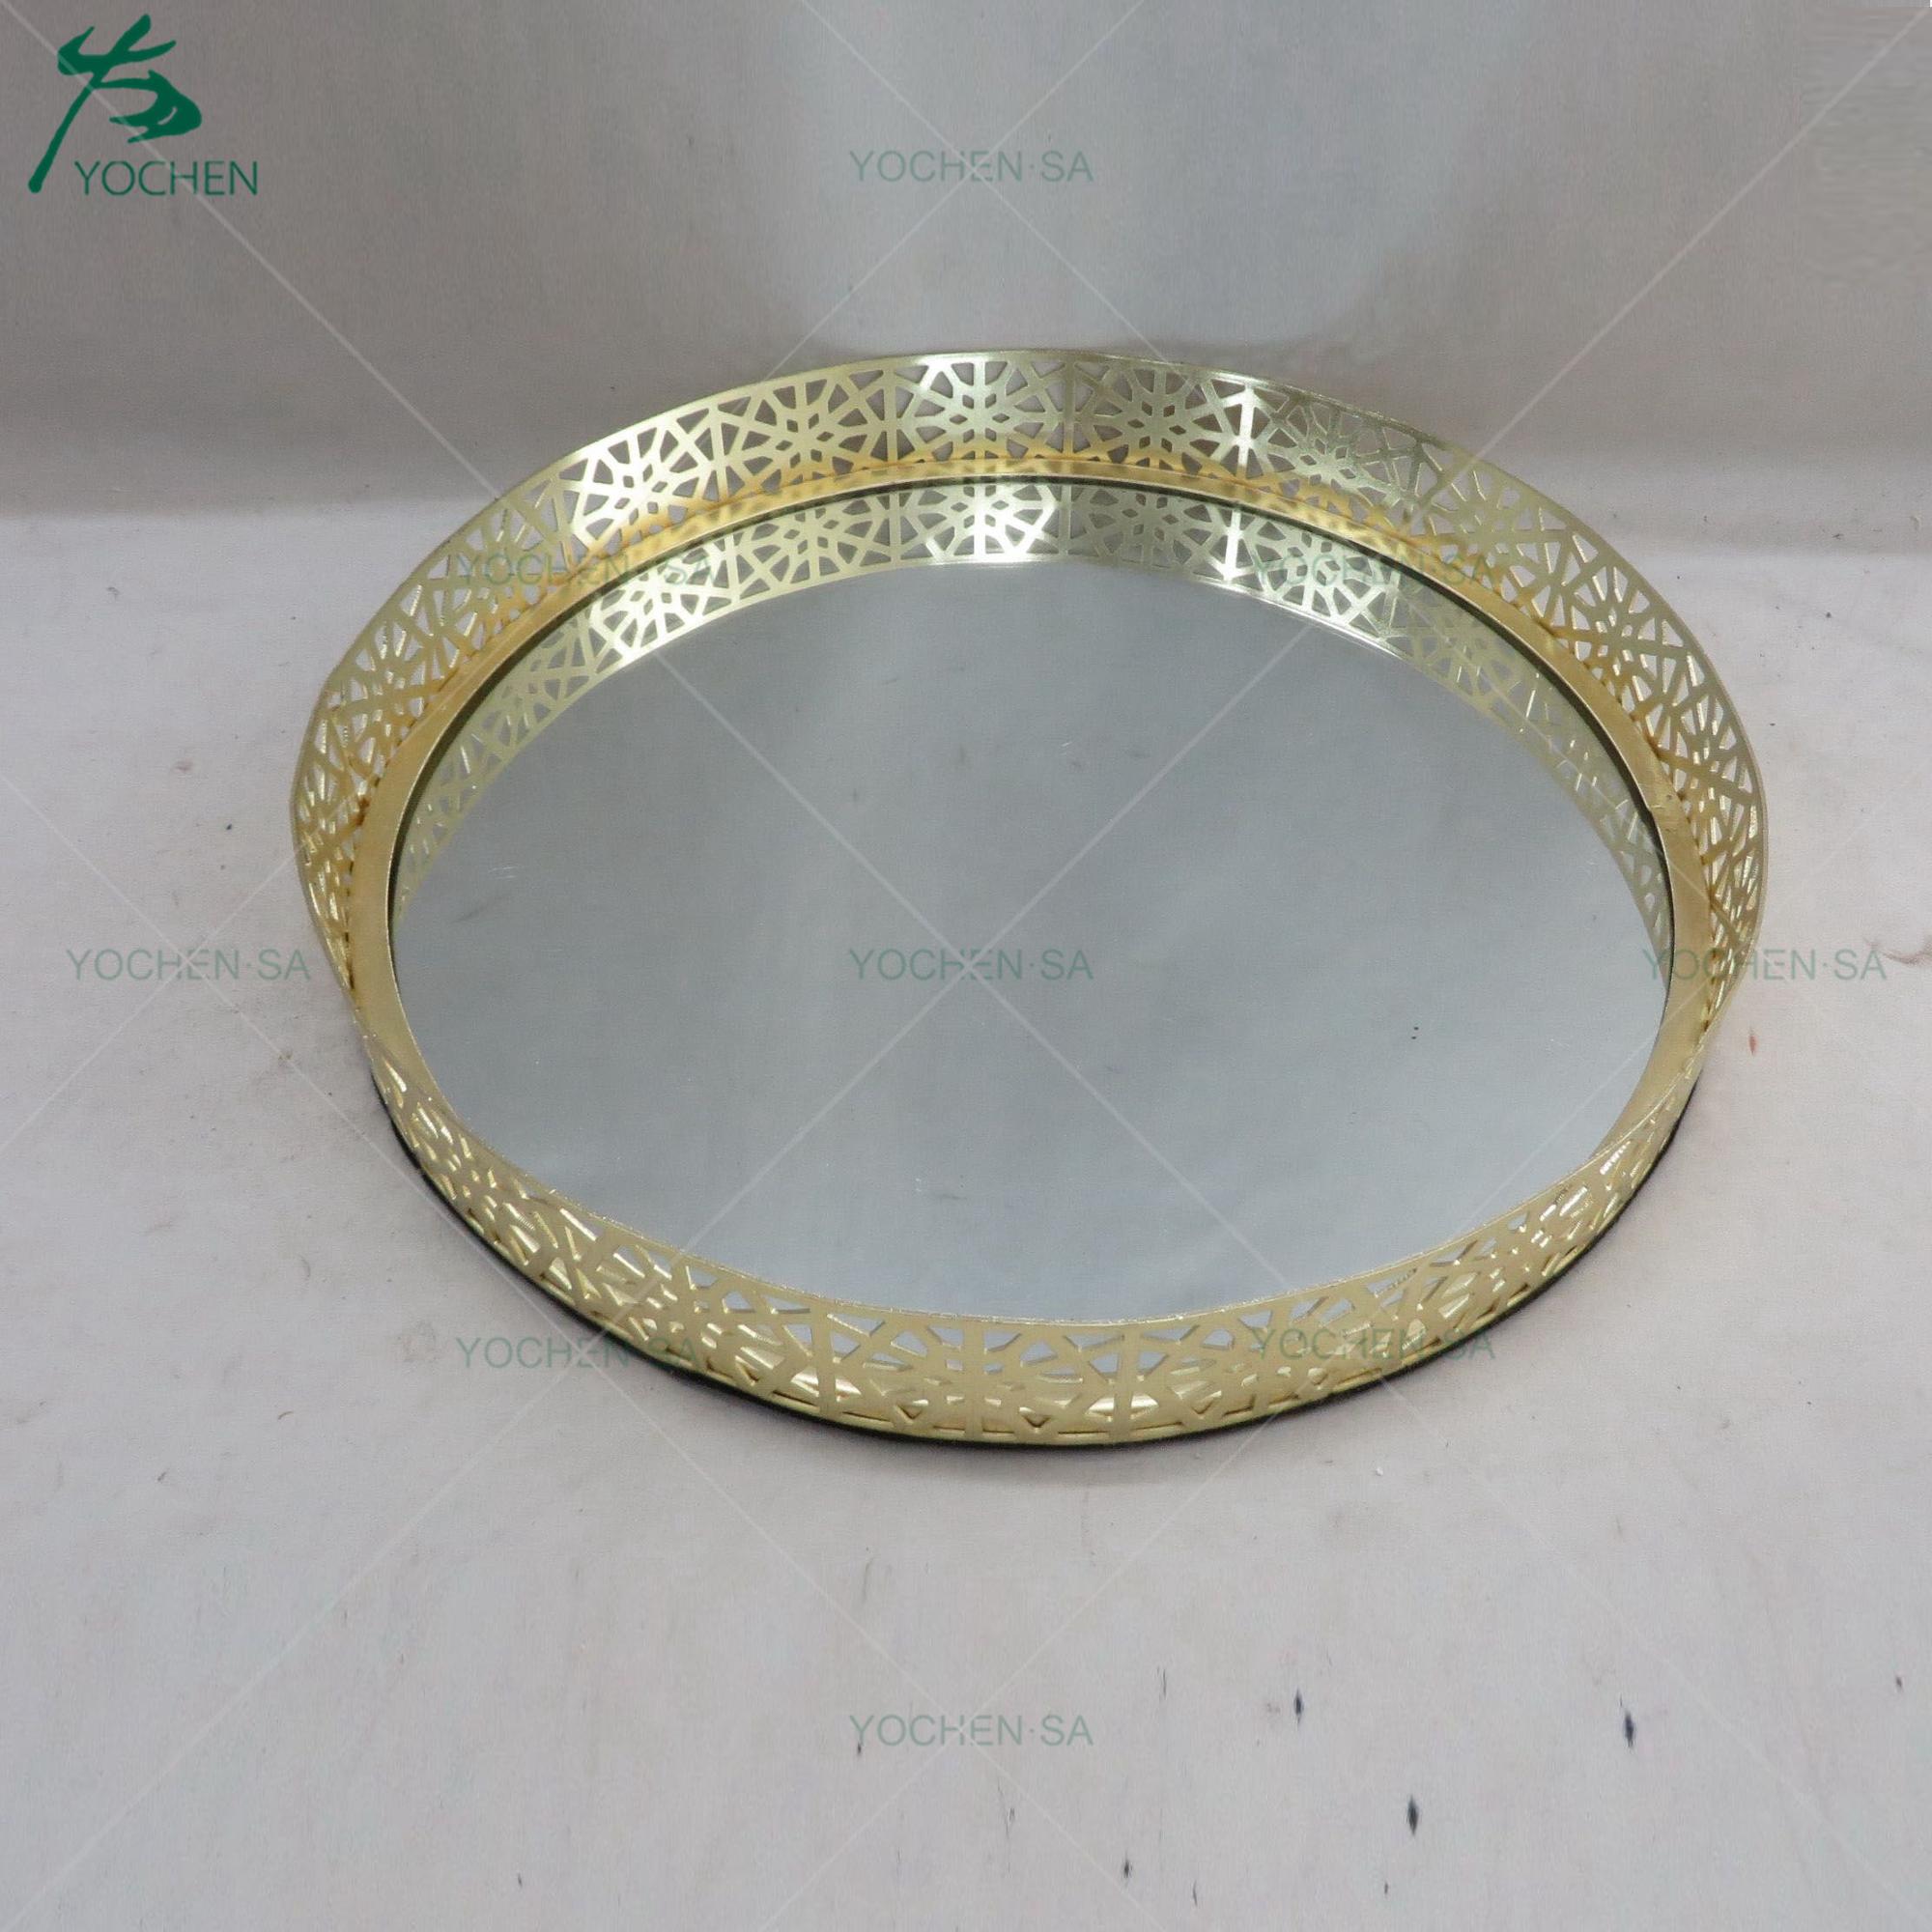 Metal Mirror Facing Serving Tray in Gold